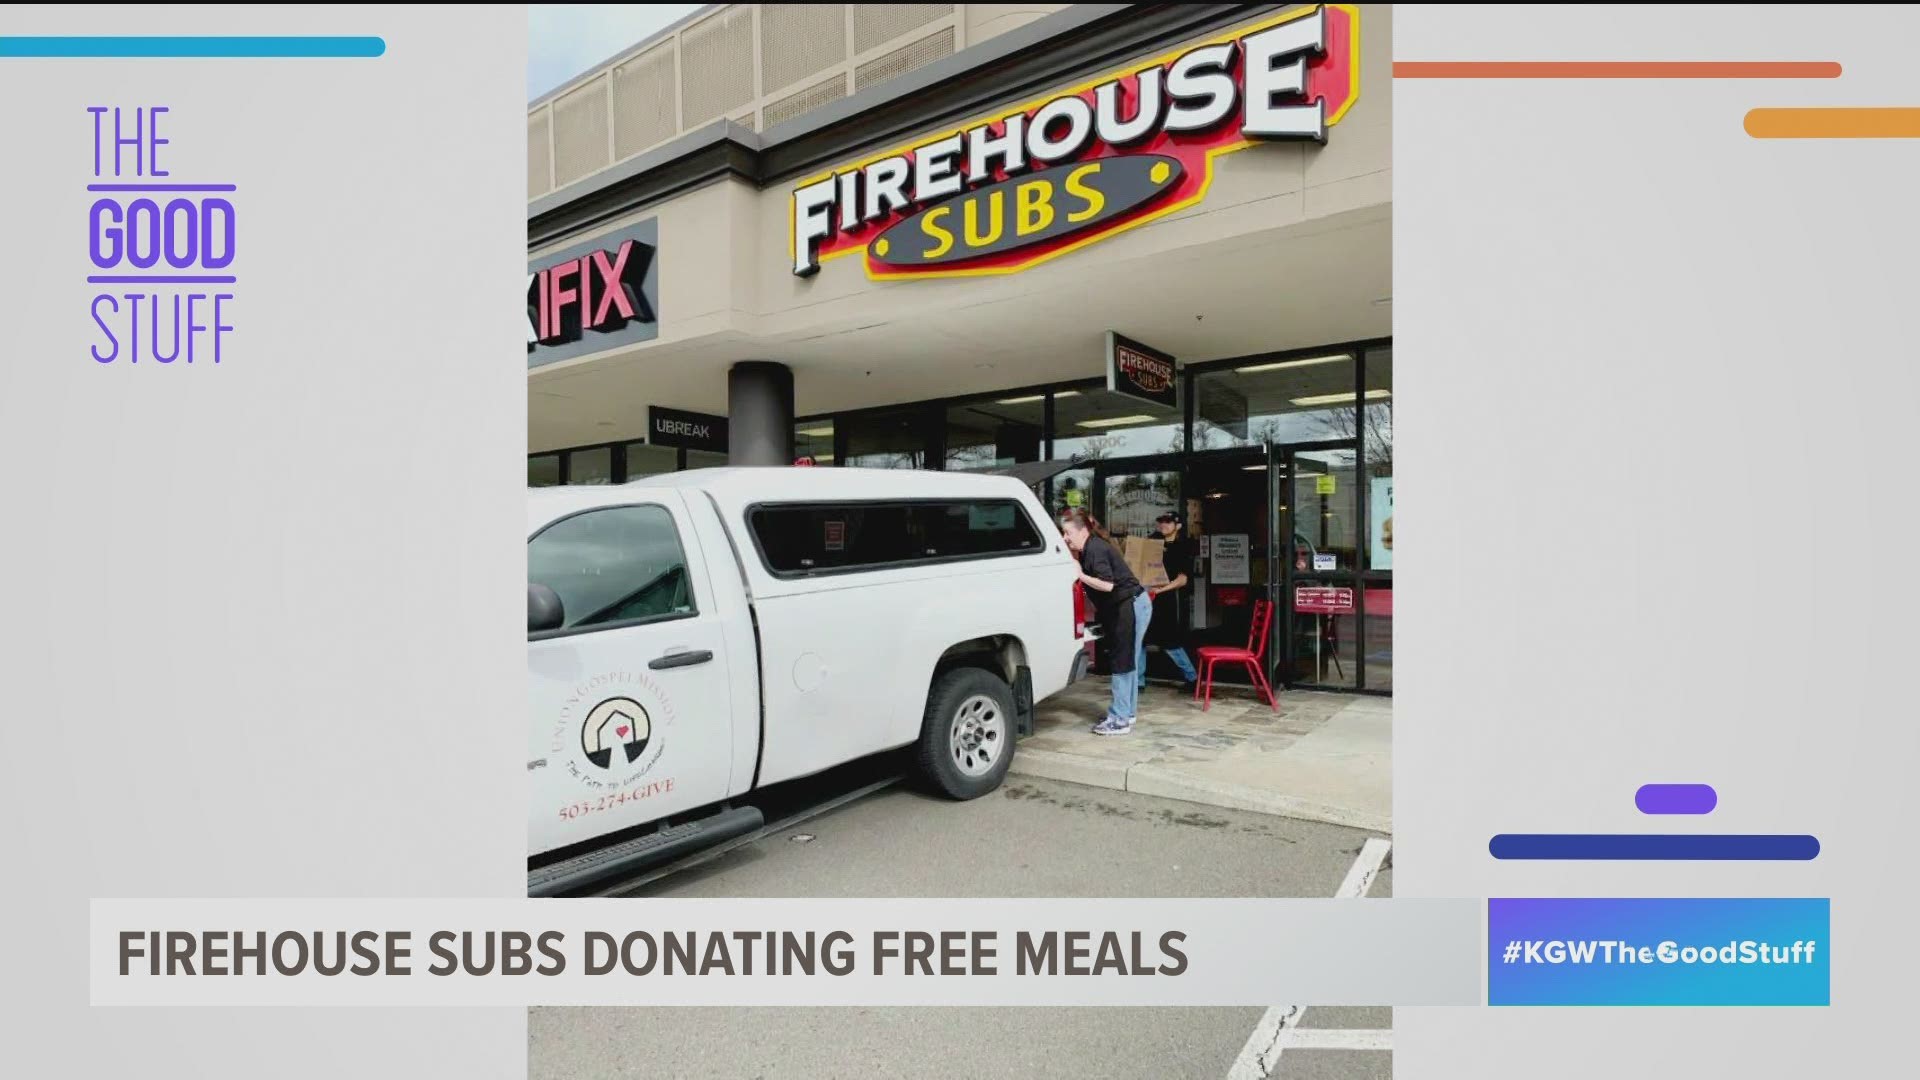 Since the pandemic started, Firehouse Subs locations in the Portland area have donated over 3,000 boxed lunches to first responders.